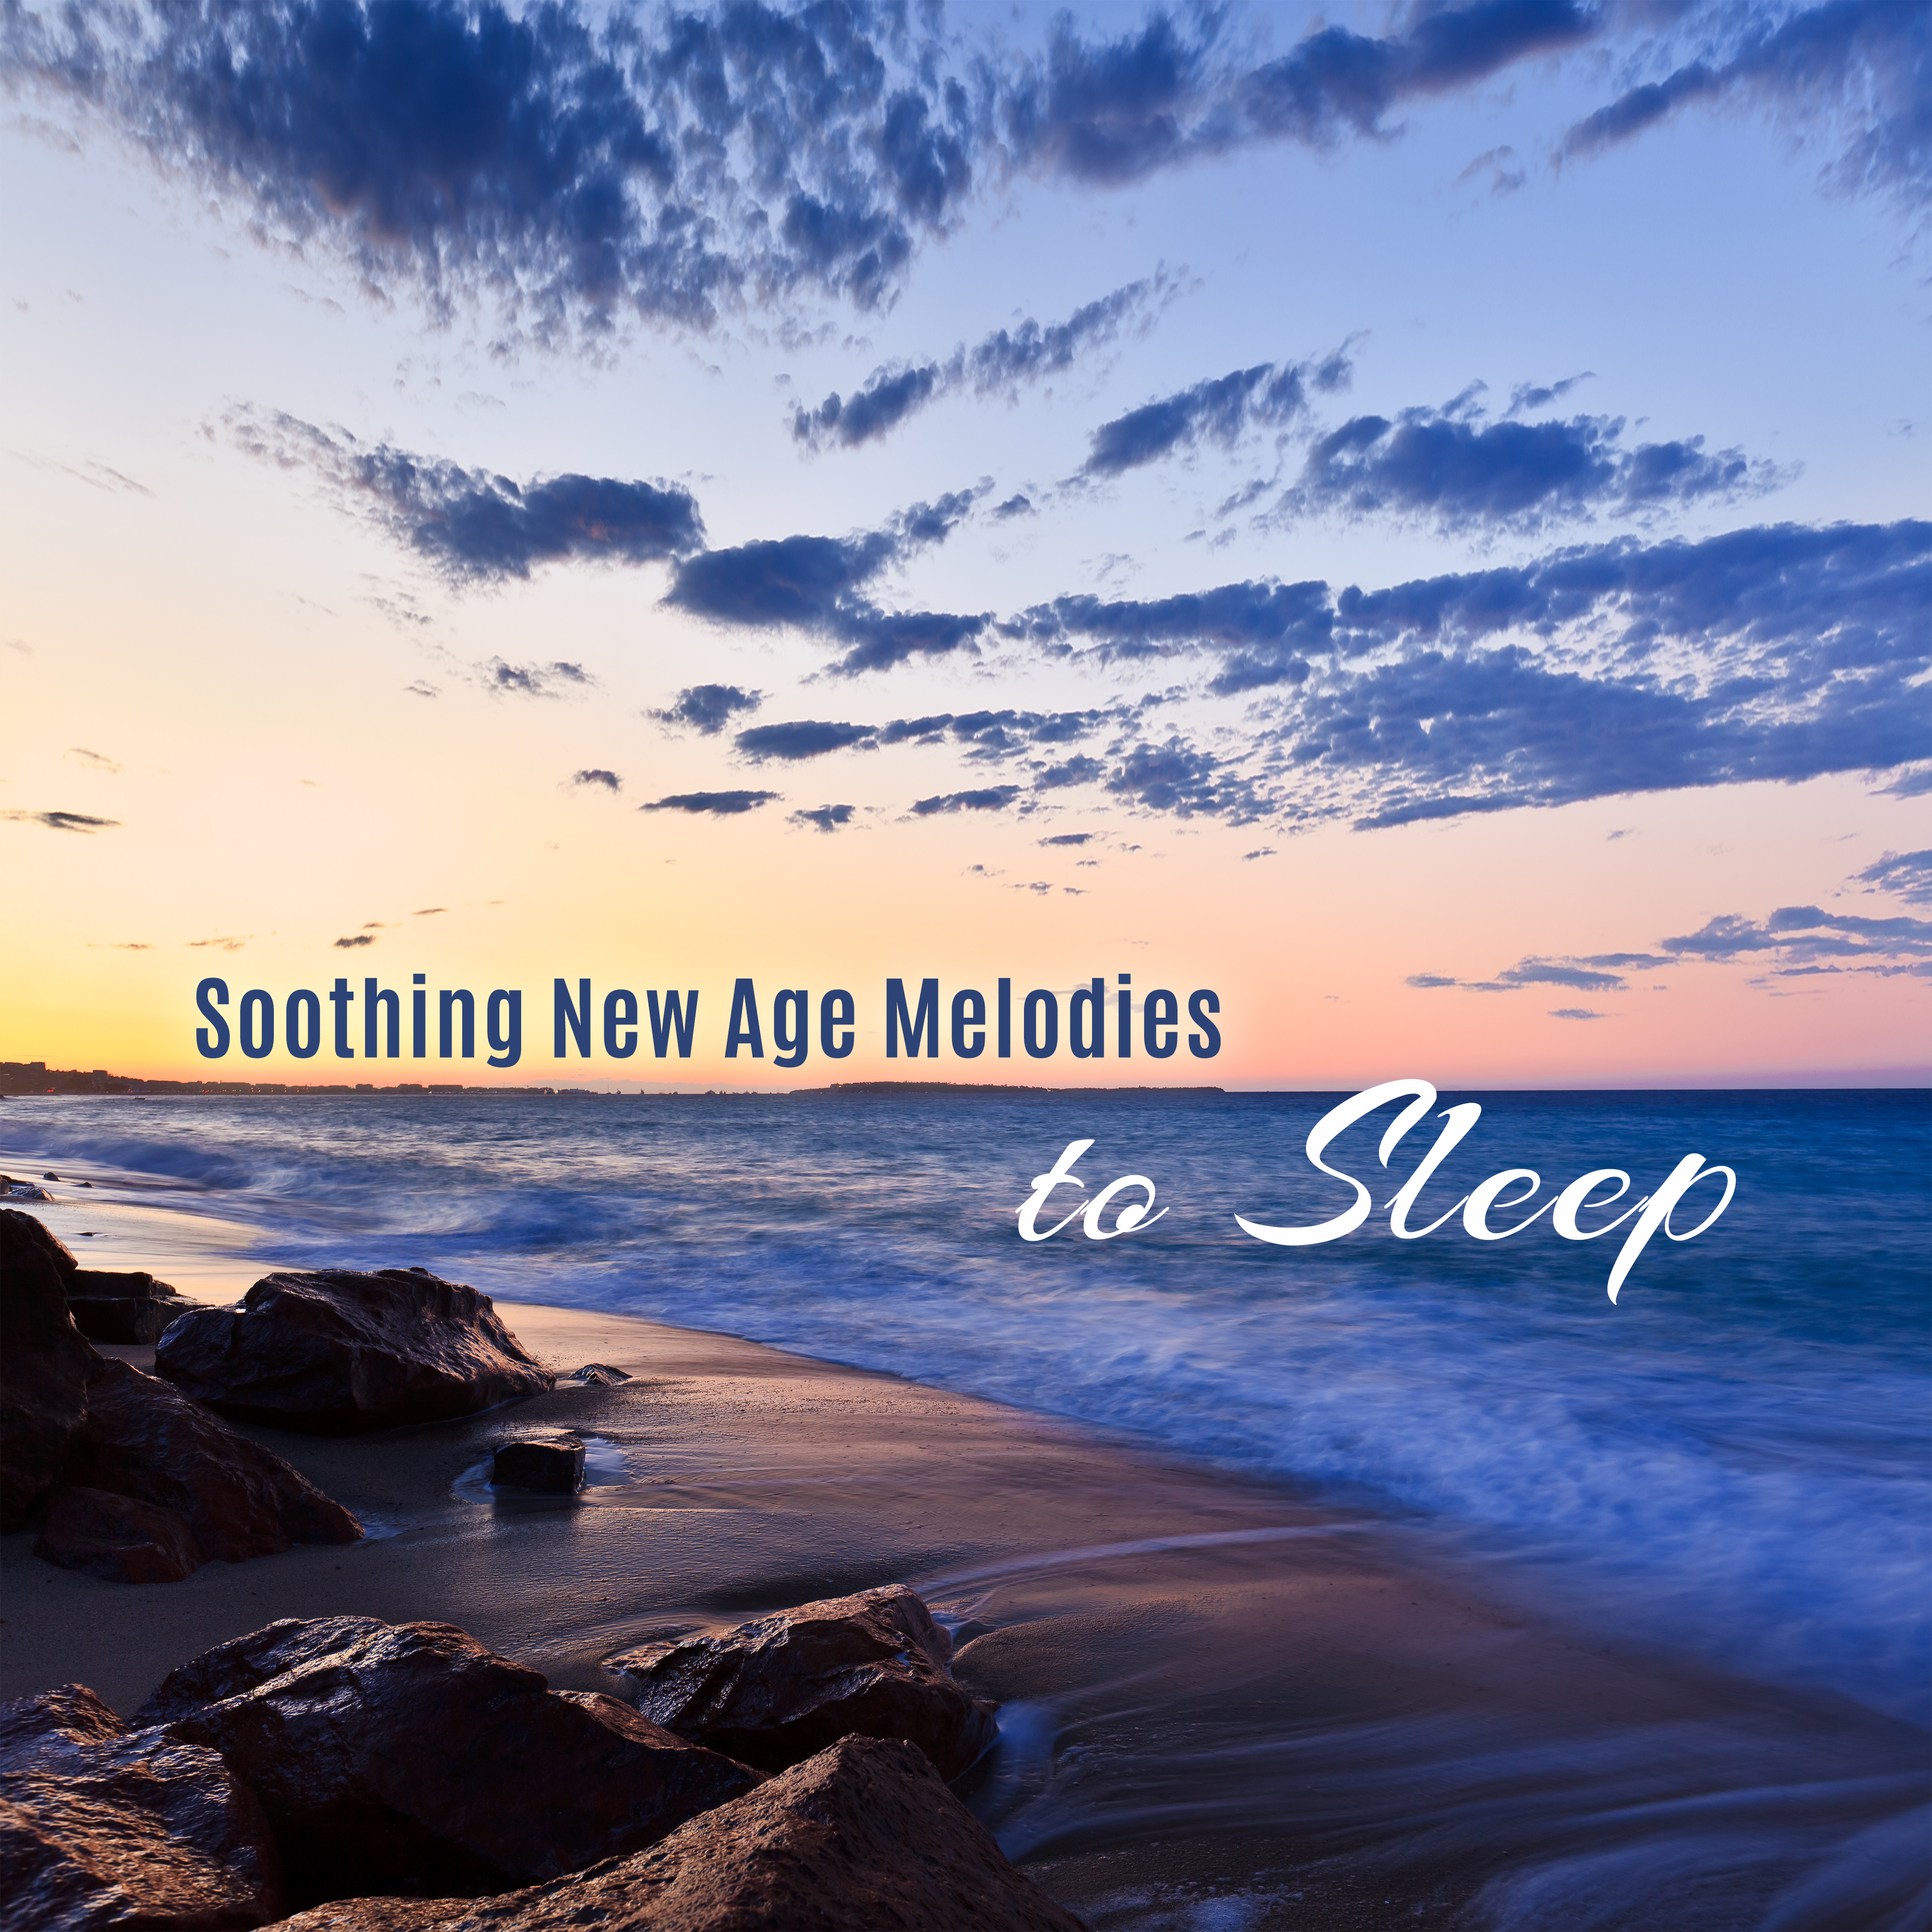 Soothing New Age Melodies to Sleep